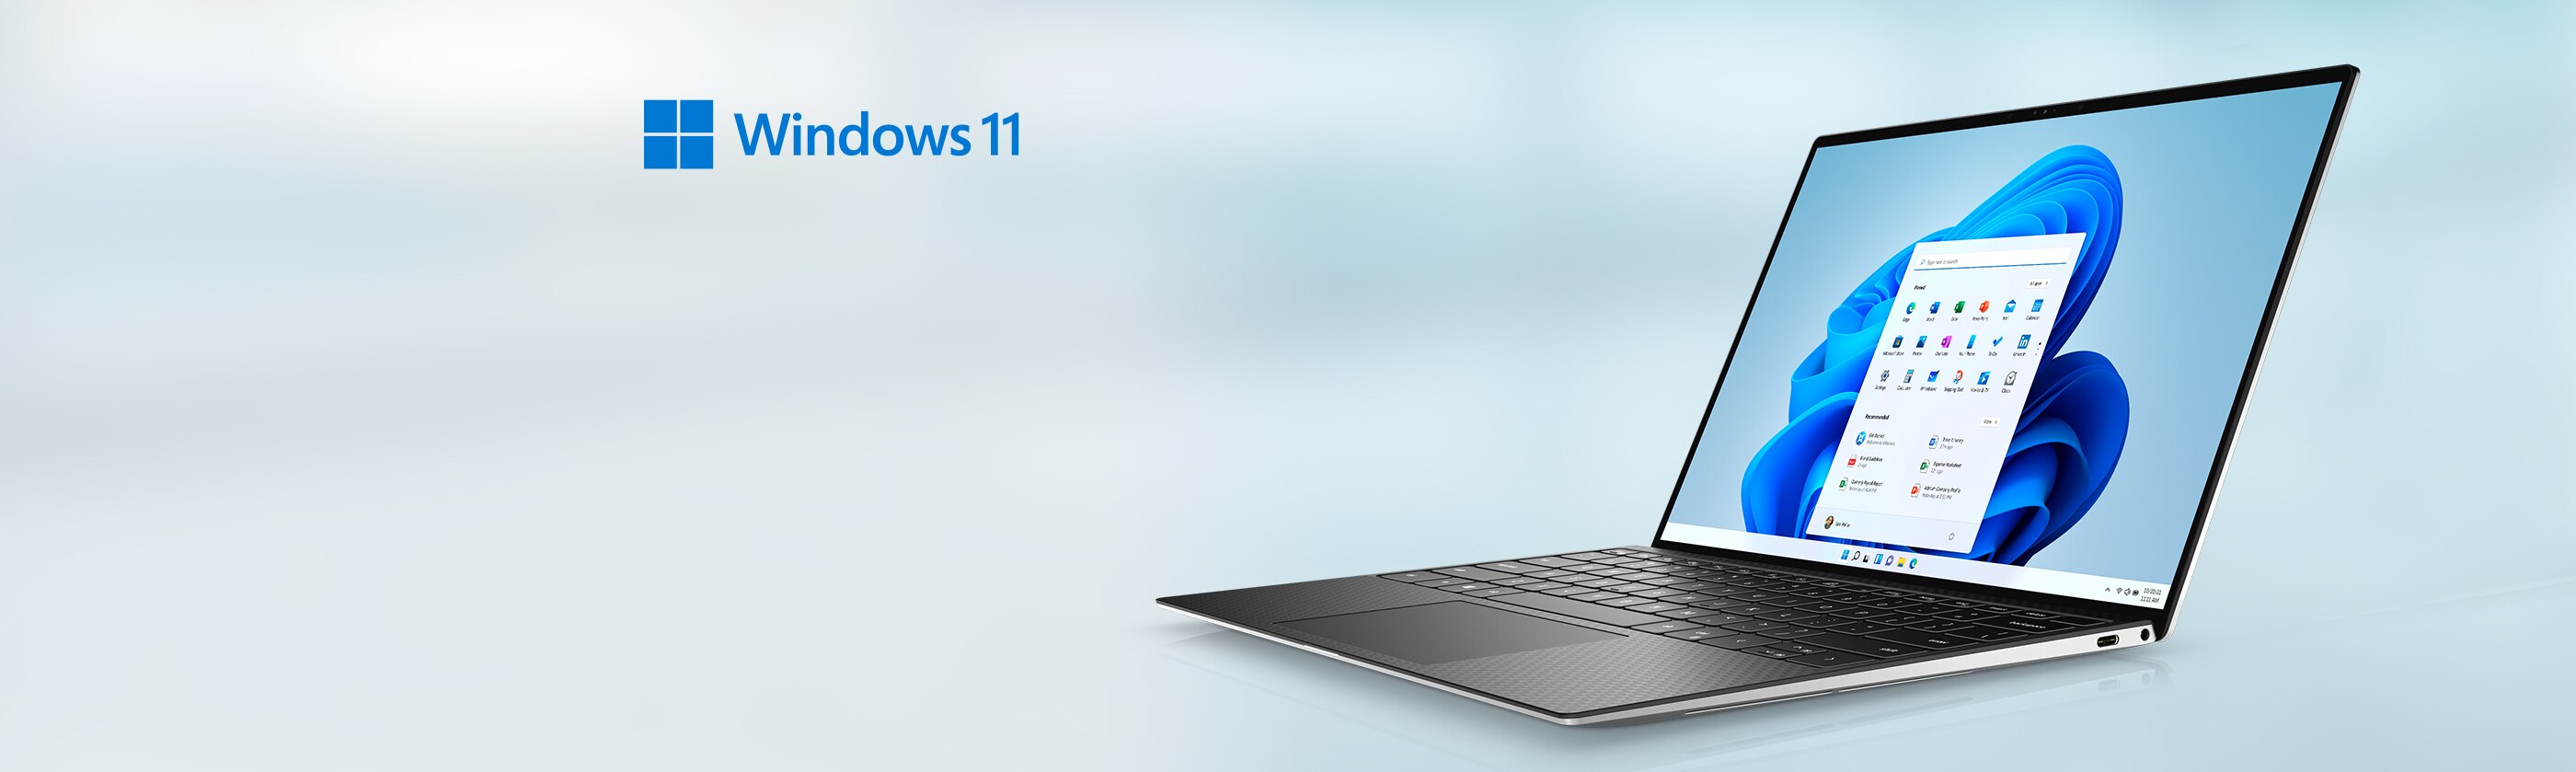 Can My Dell Be Upgraded to Windows 11?